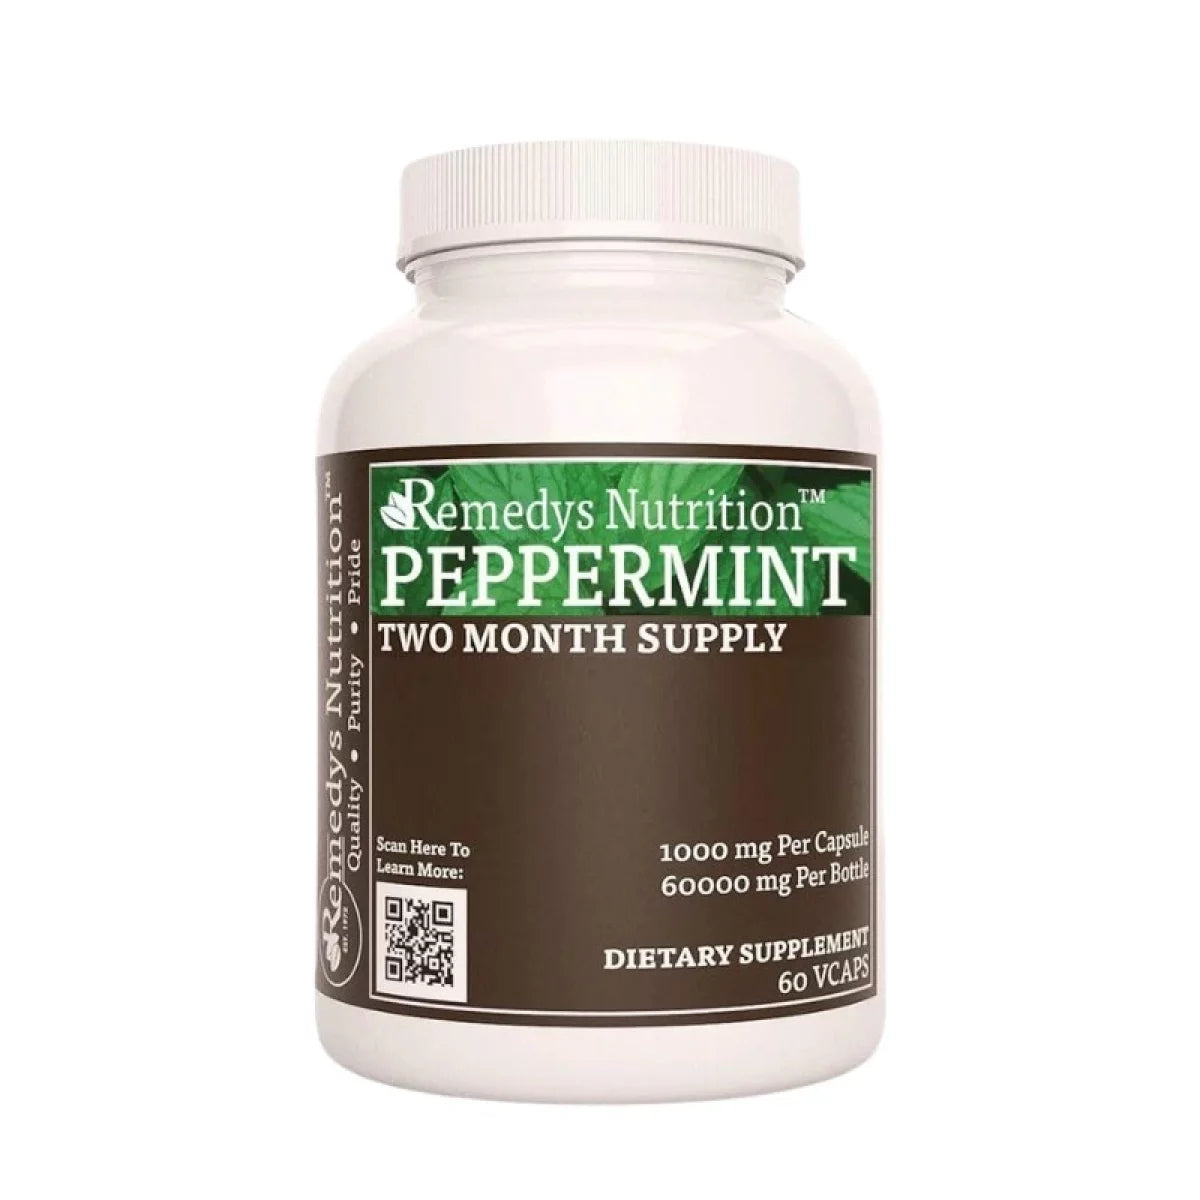 Image of Remedy's Nutrition® Peppermint Capsules Dietary Herbal Supplement front bottle. Made in the USA. Mentha x piperita